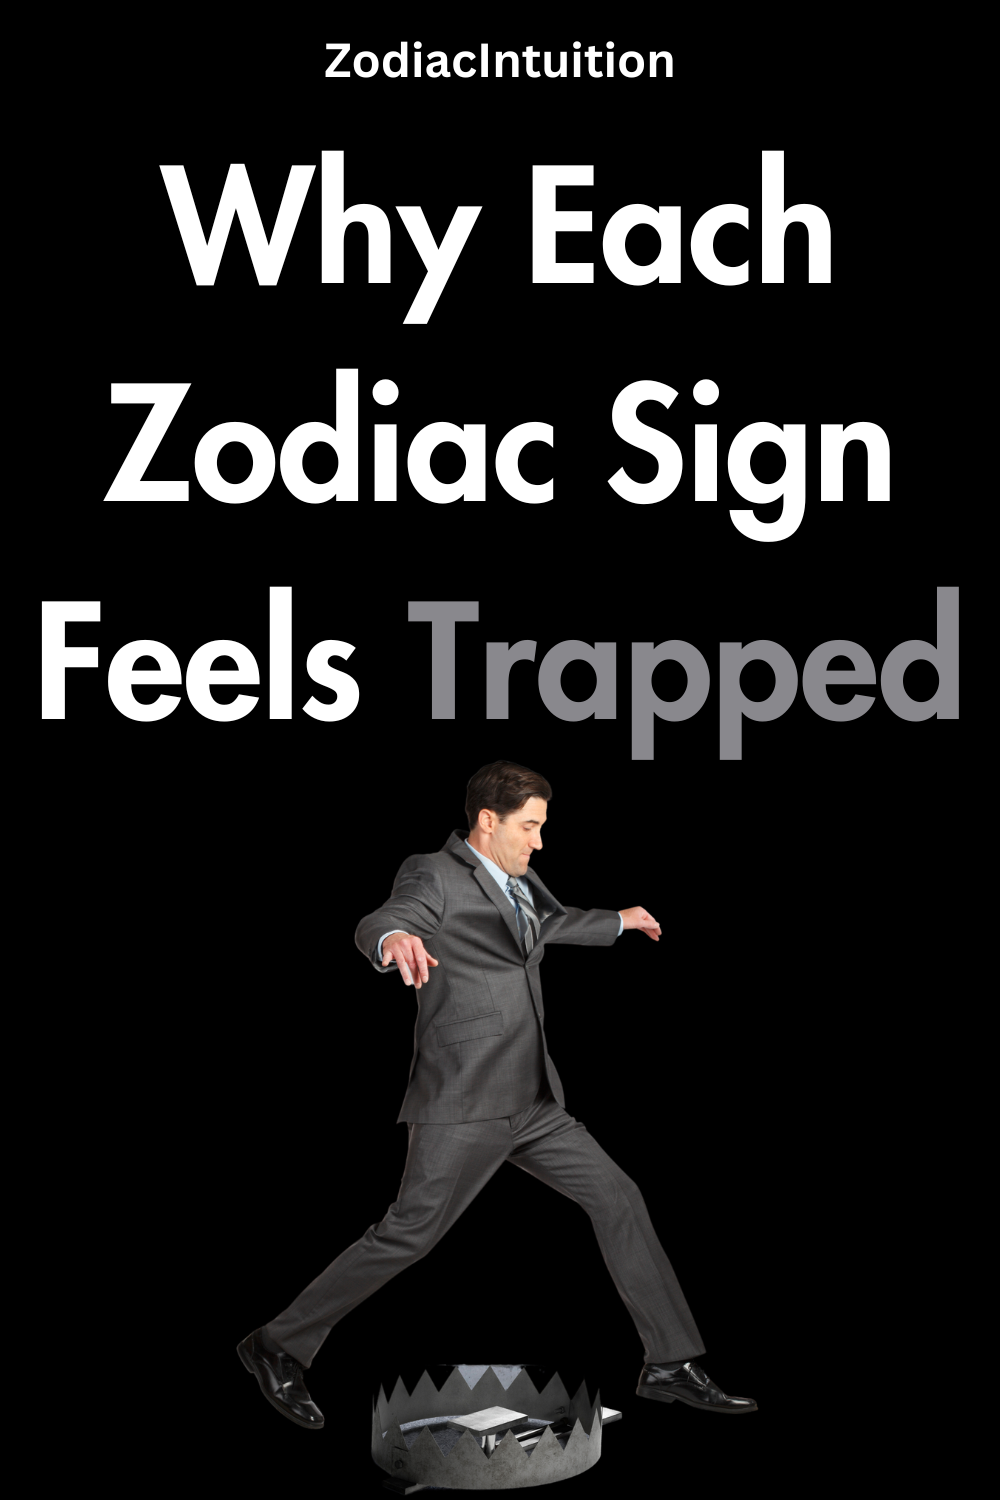 Why Each Zodiac Sign Feels Trapped